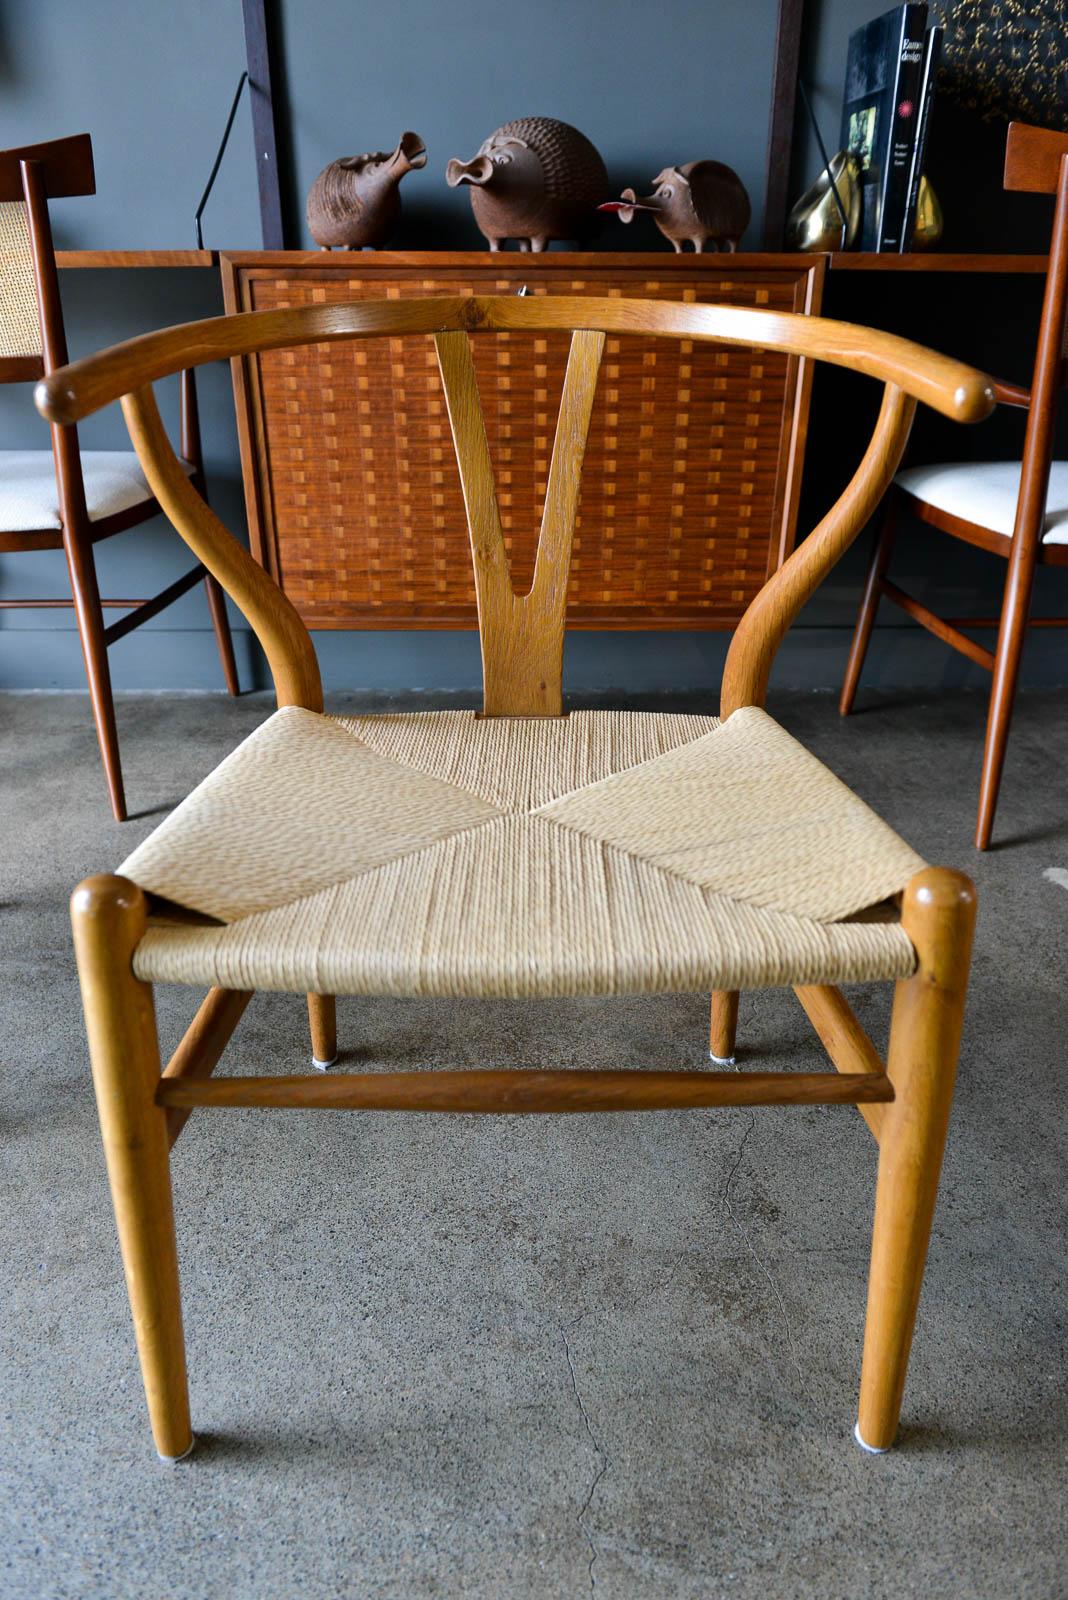 Set of 4 early original Hans Wegner CH24 Wishbone chairs, circa 1955. Hard to find early examples of Hans Wegner's Classic iconic CH24 wishbone chair. This set is very early, not modern re-issues, and from a one owner estate. All 4 match perfectly